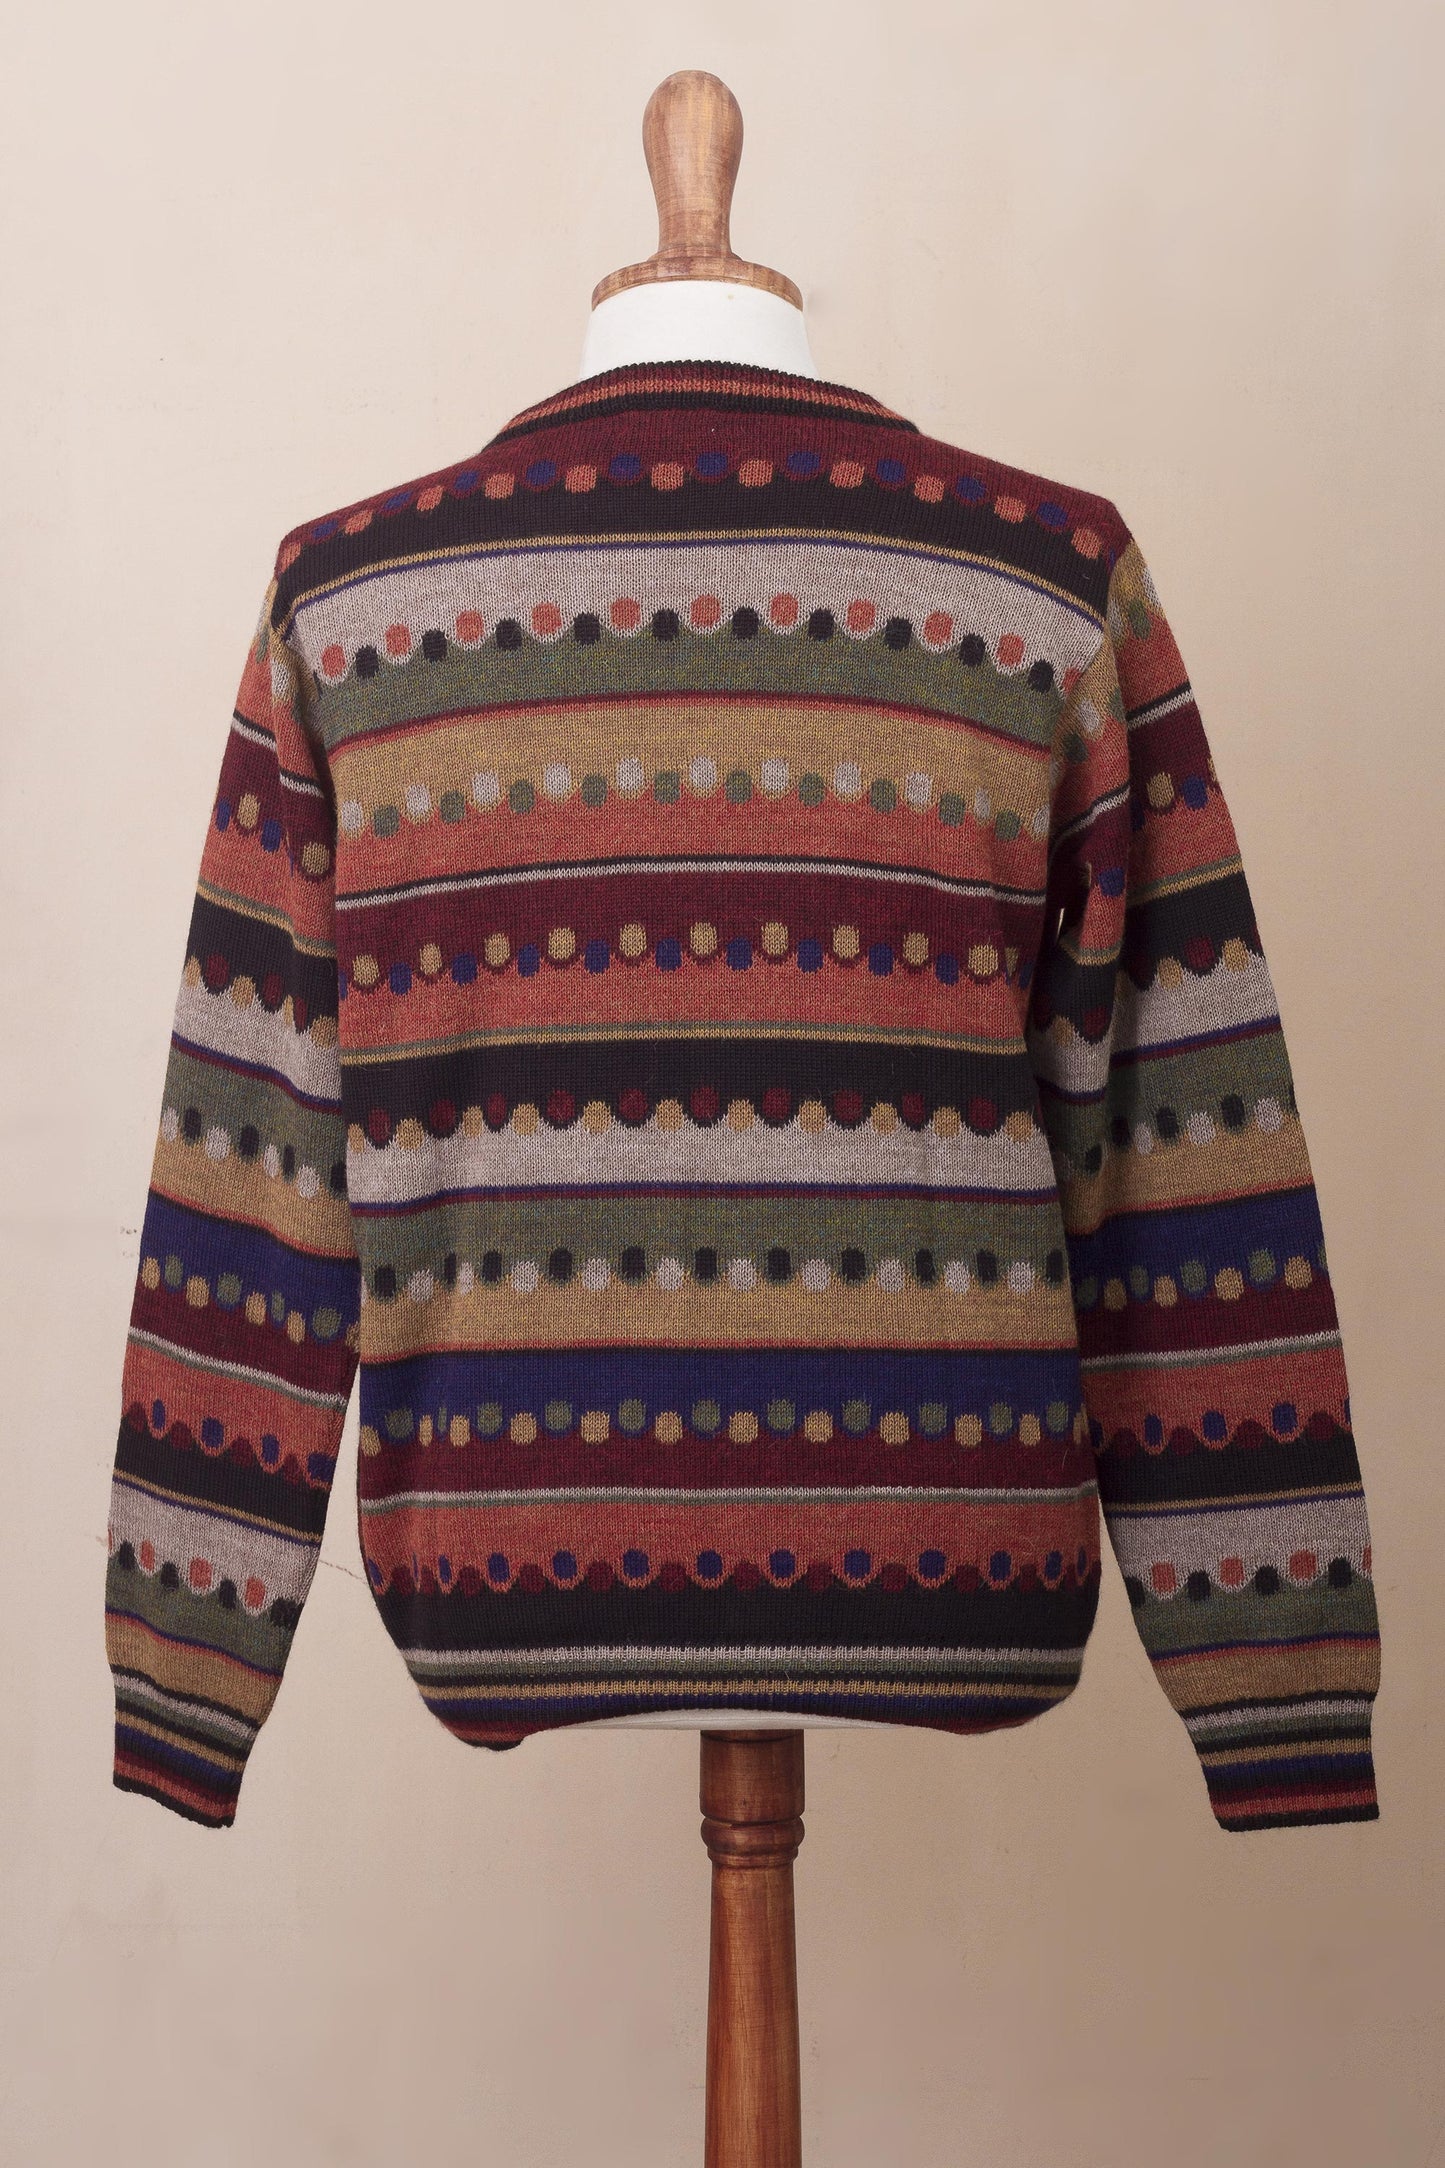 Autumnal Andes Men's Striped 100% Alpaca Pullover Sweater from Peru